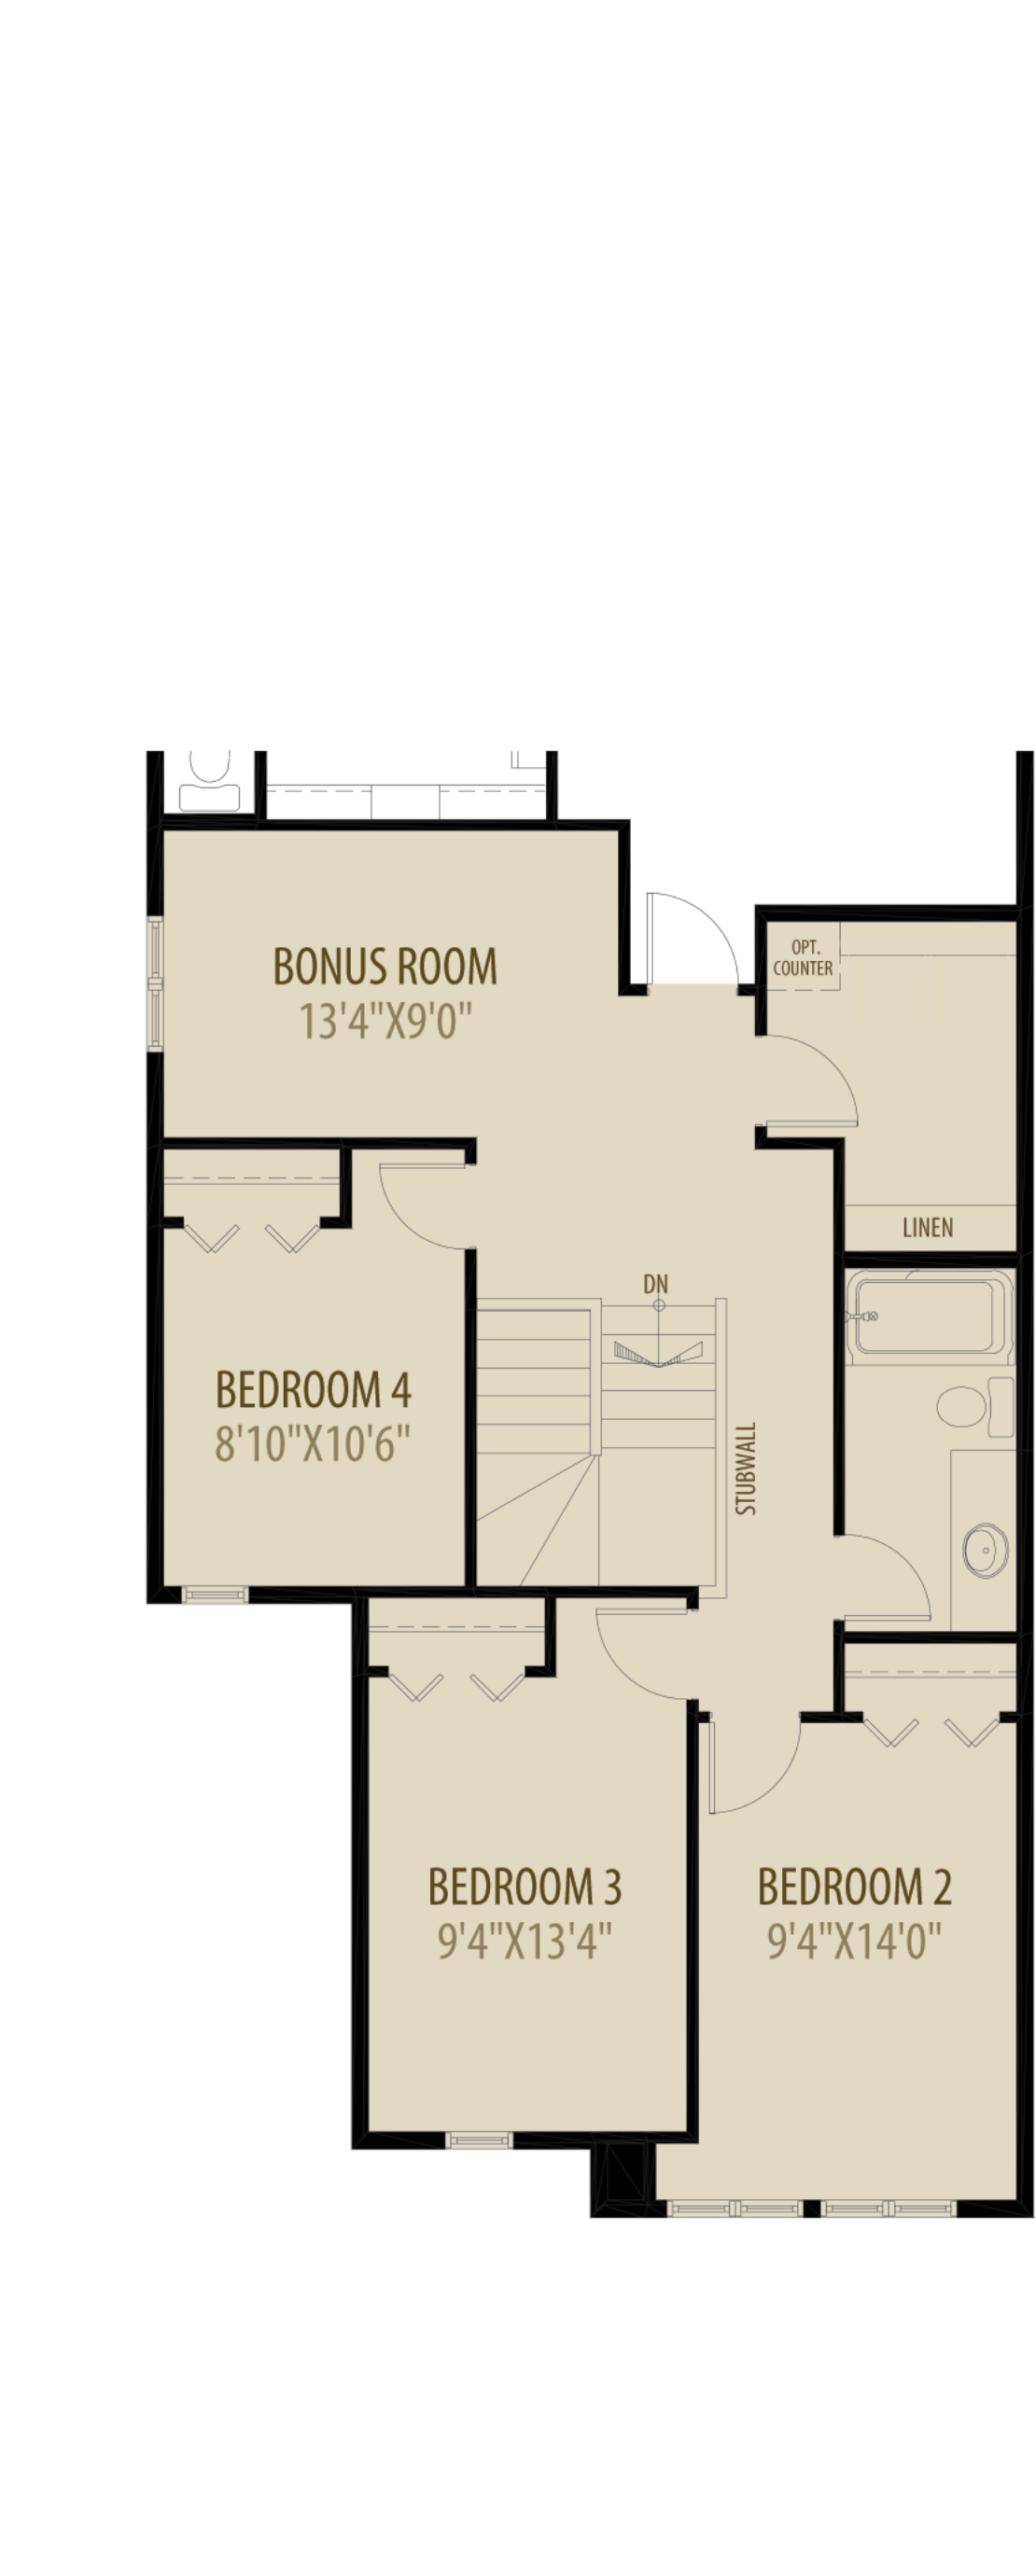 Option 4 4th Bedroom Revised adds 100 sq ft